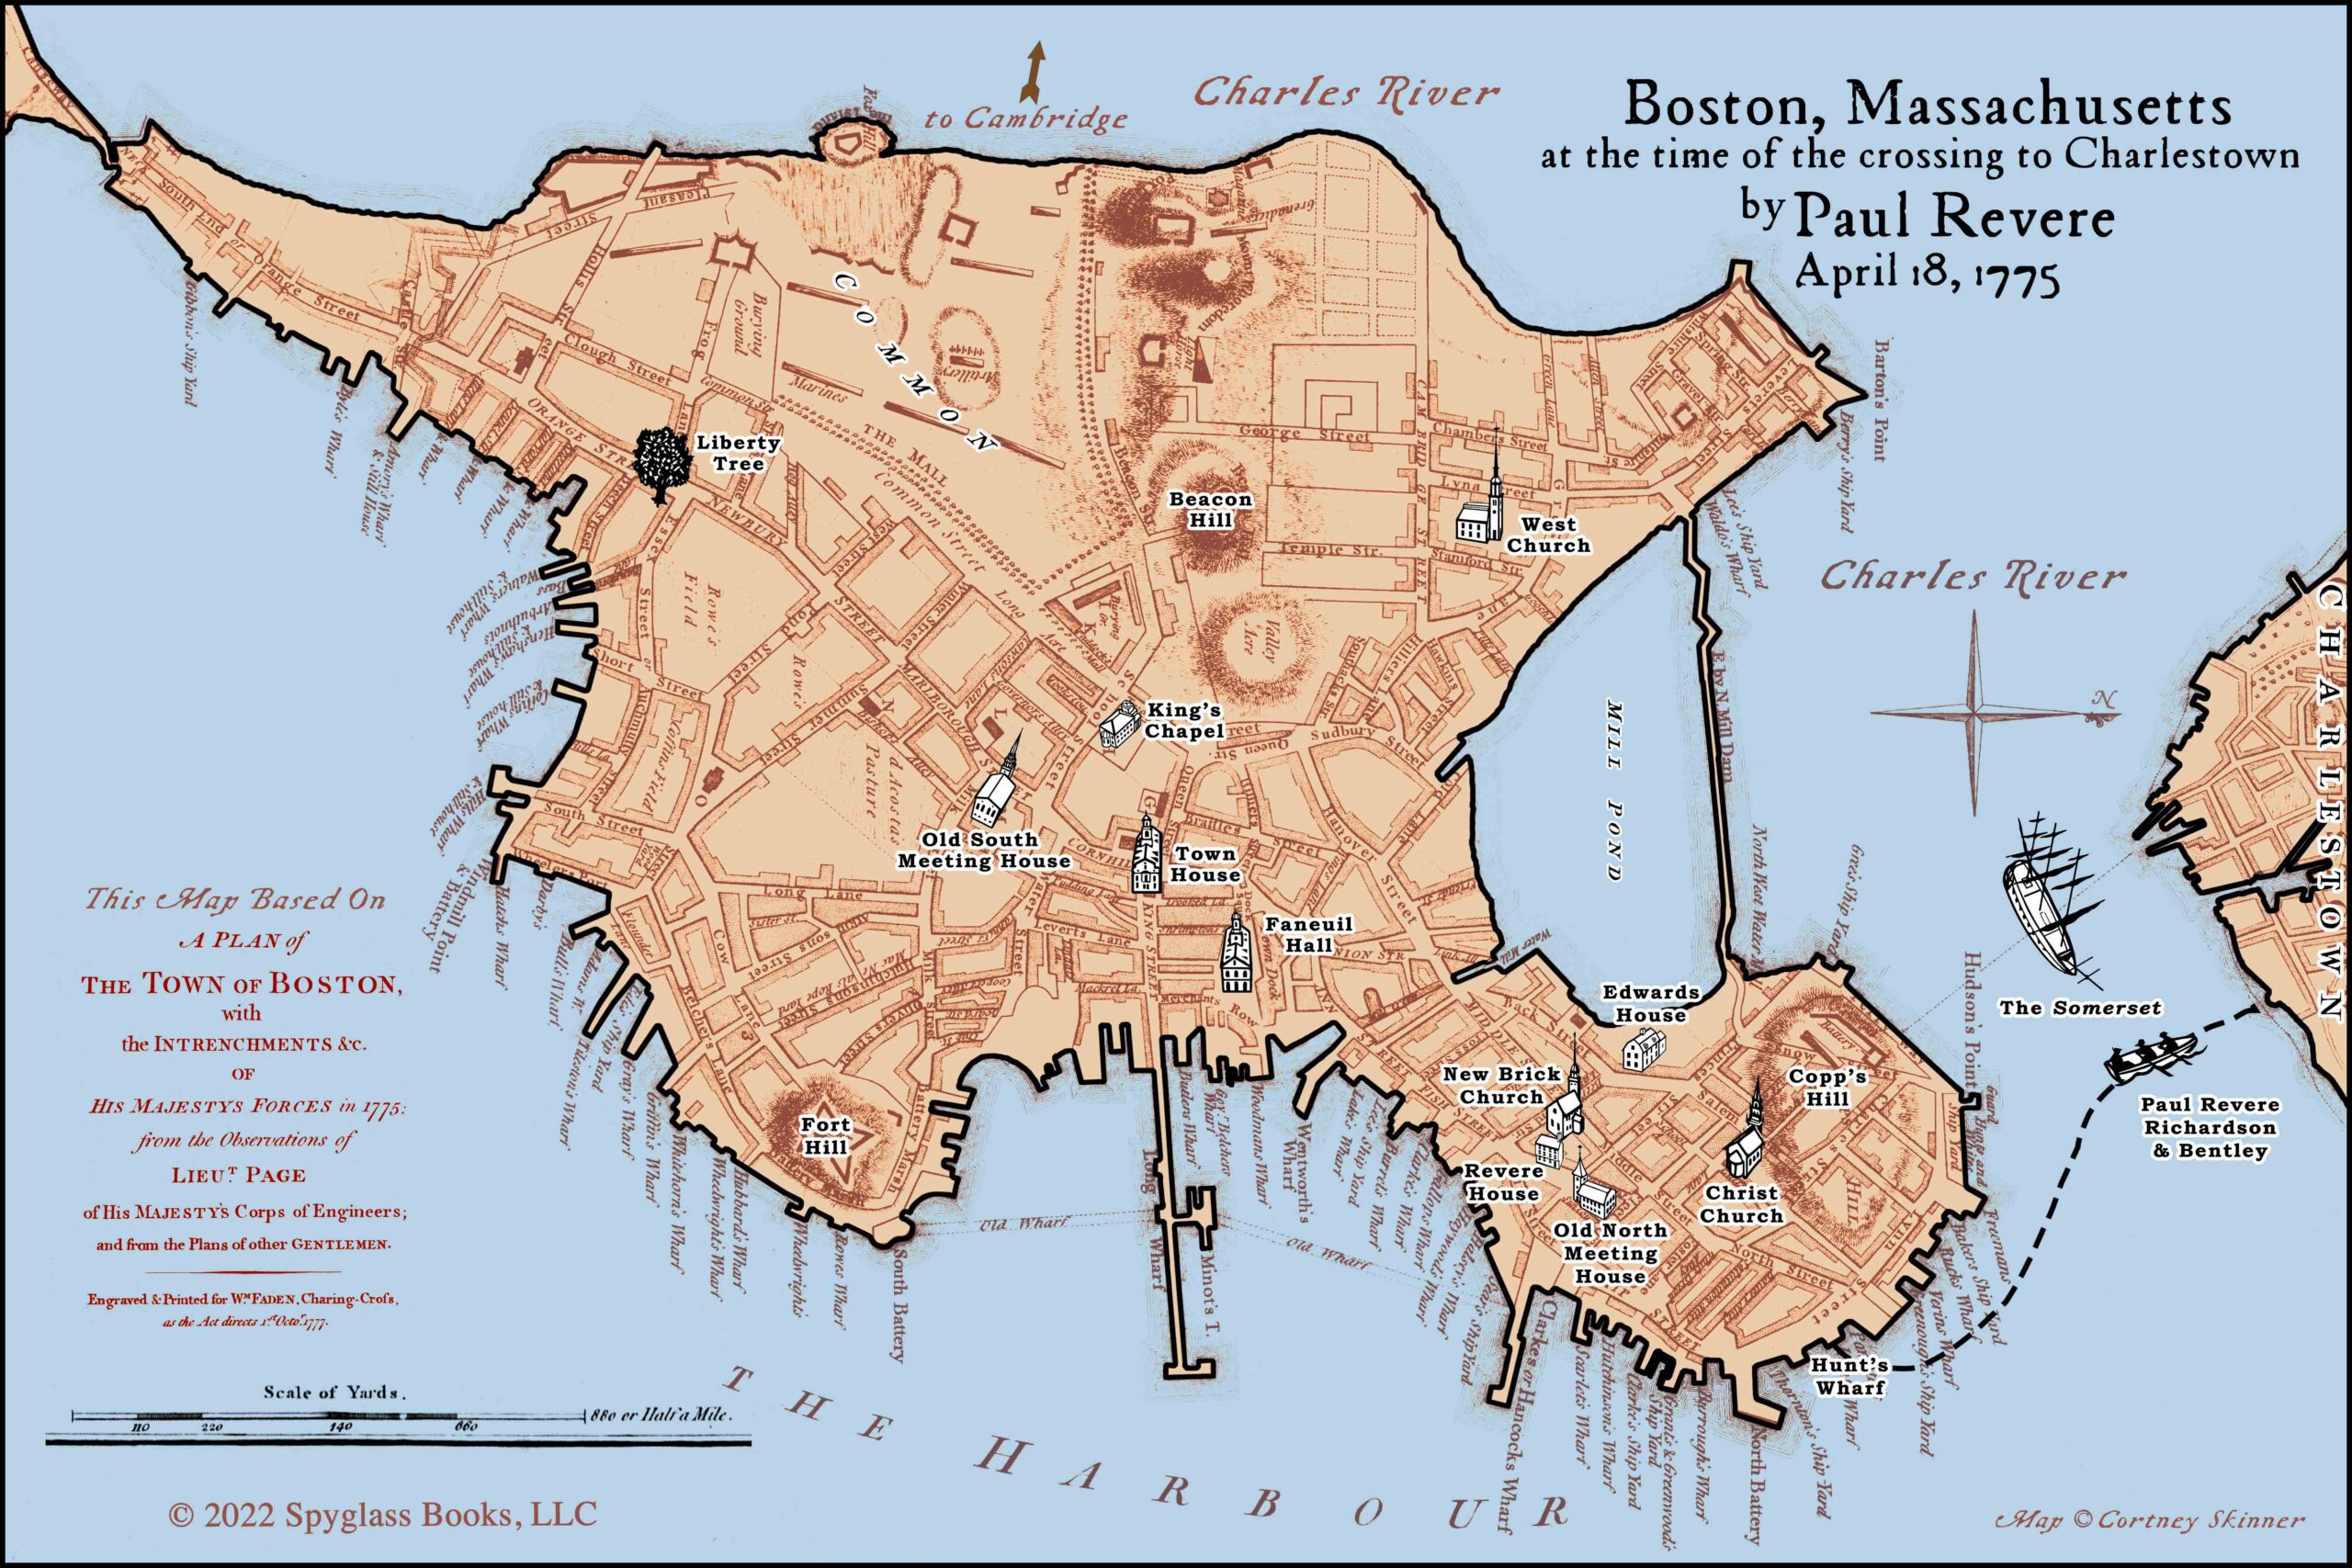 Map of Boston at the time of the crossing to Charlestown by Paul Revere